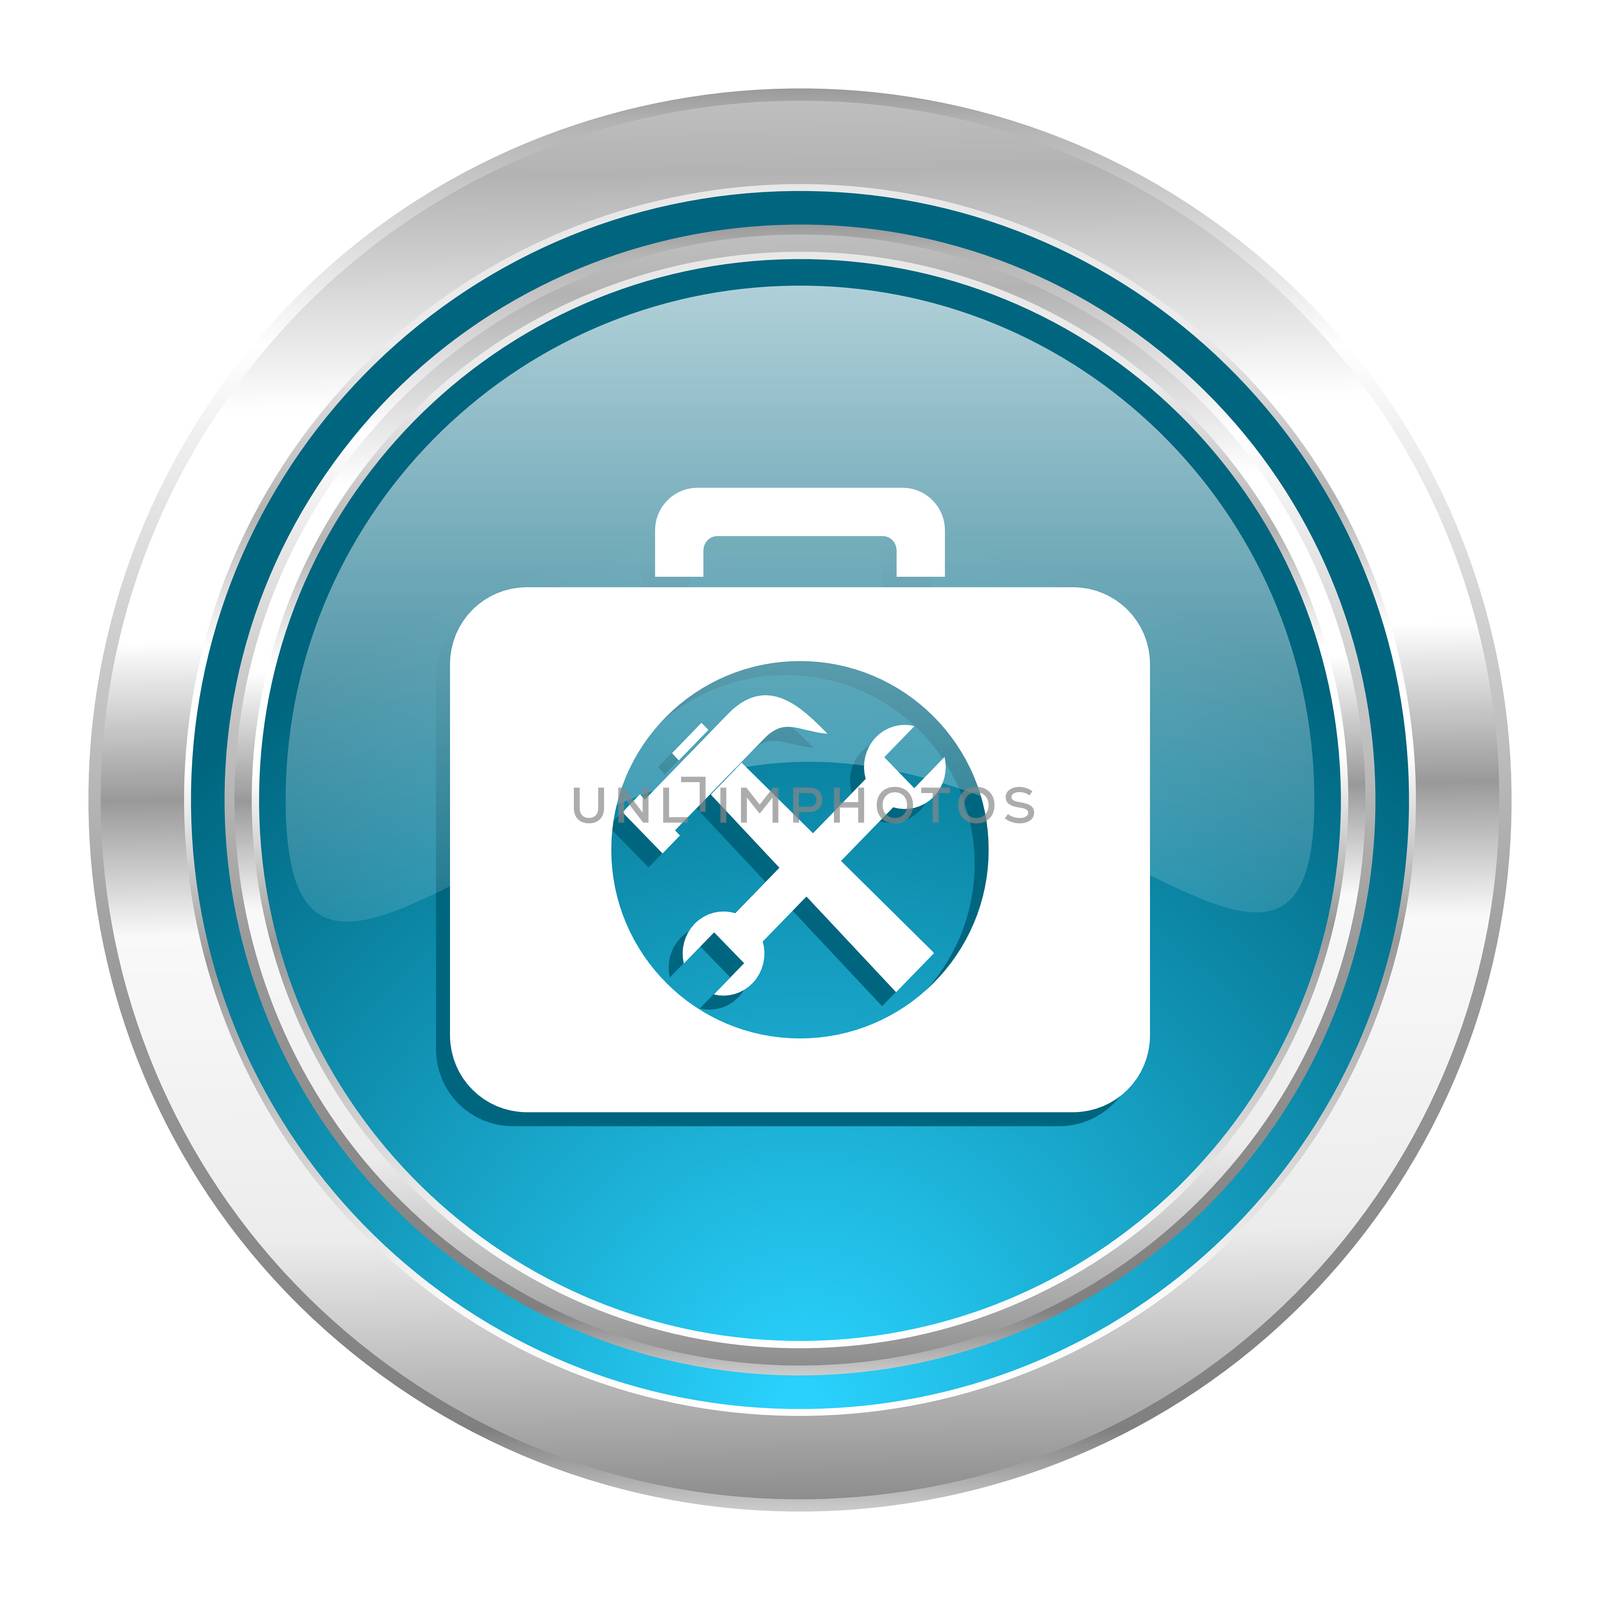 toolkit icon, service sign by alexwhite